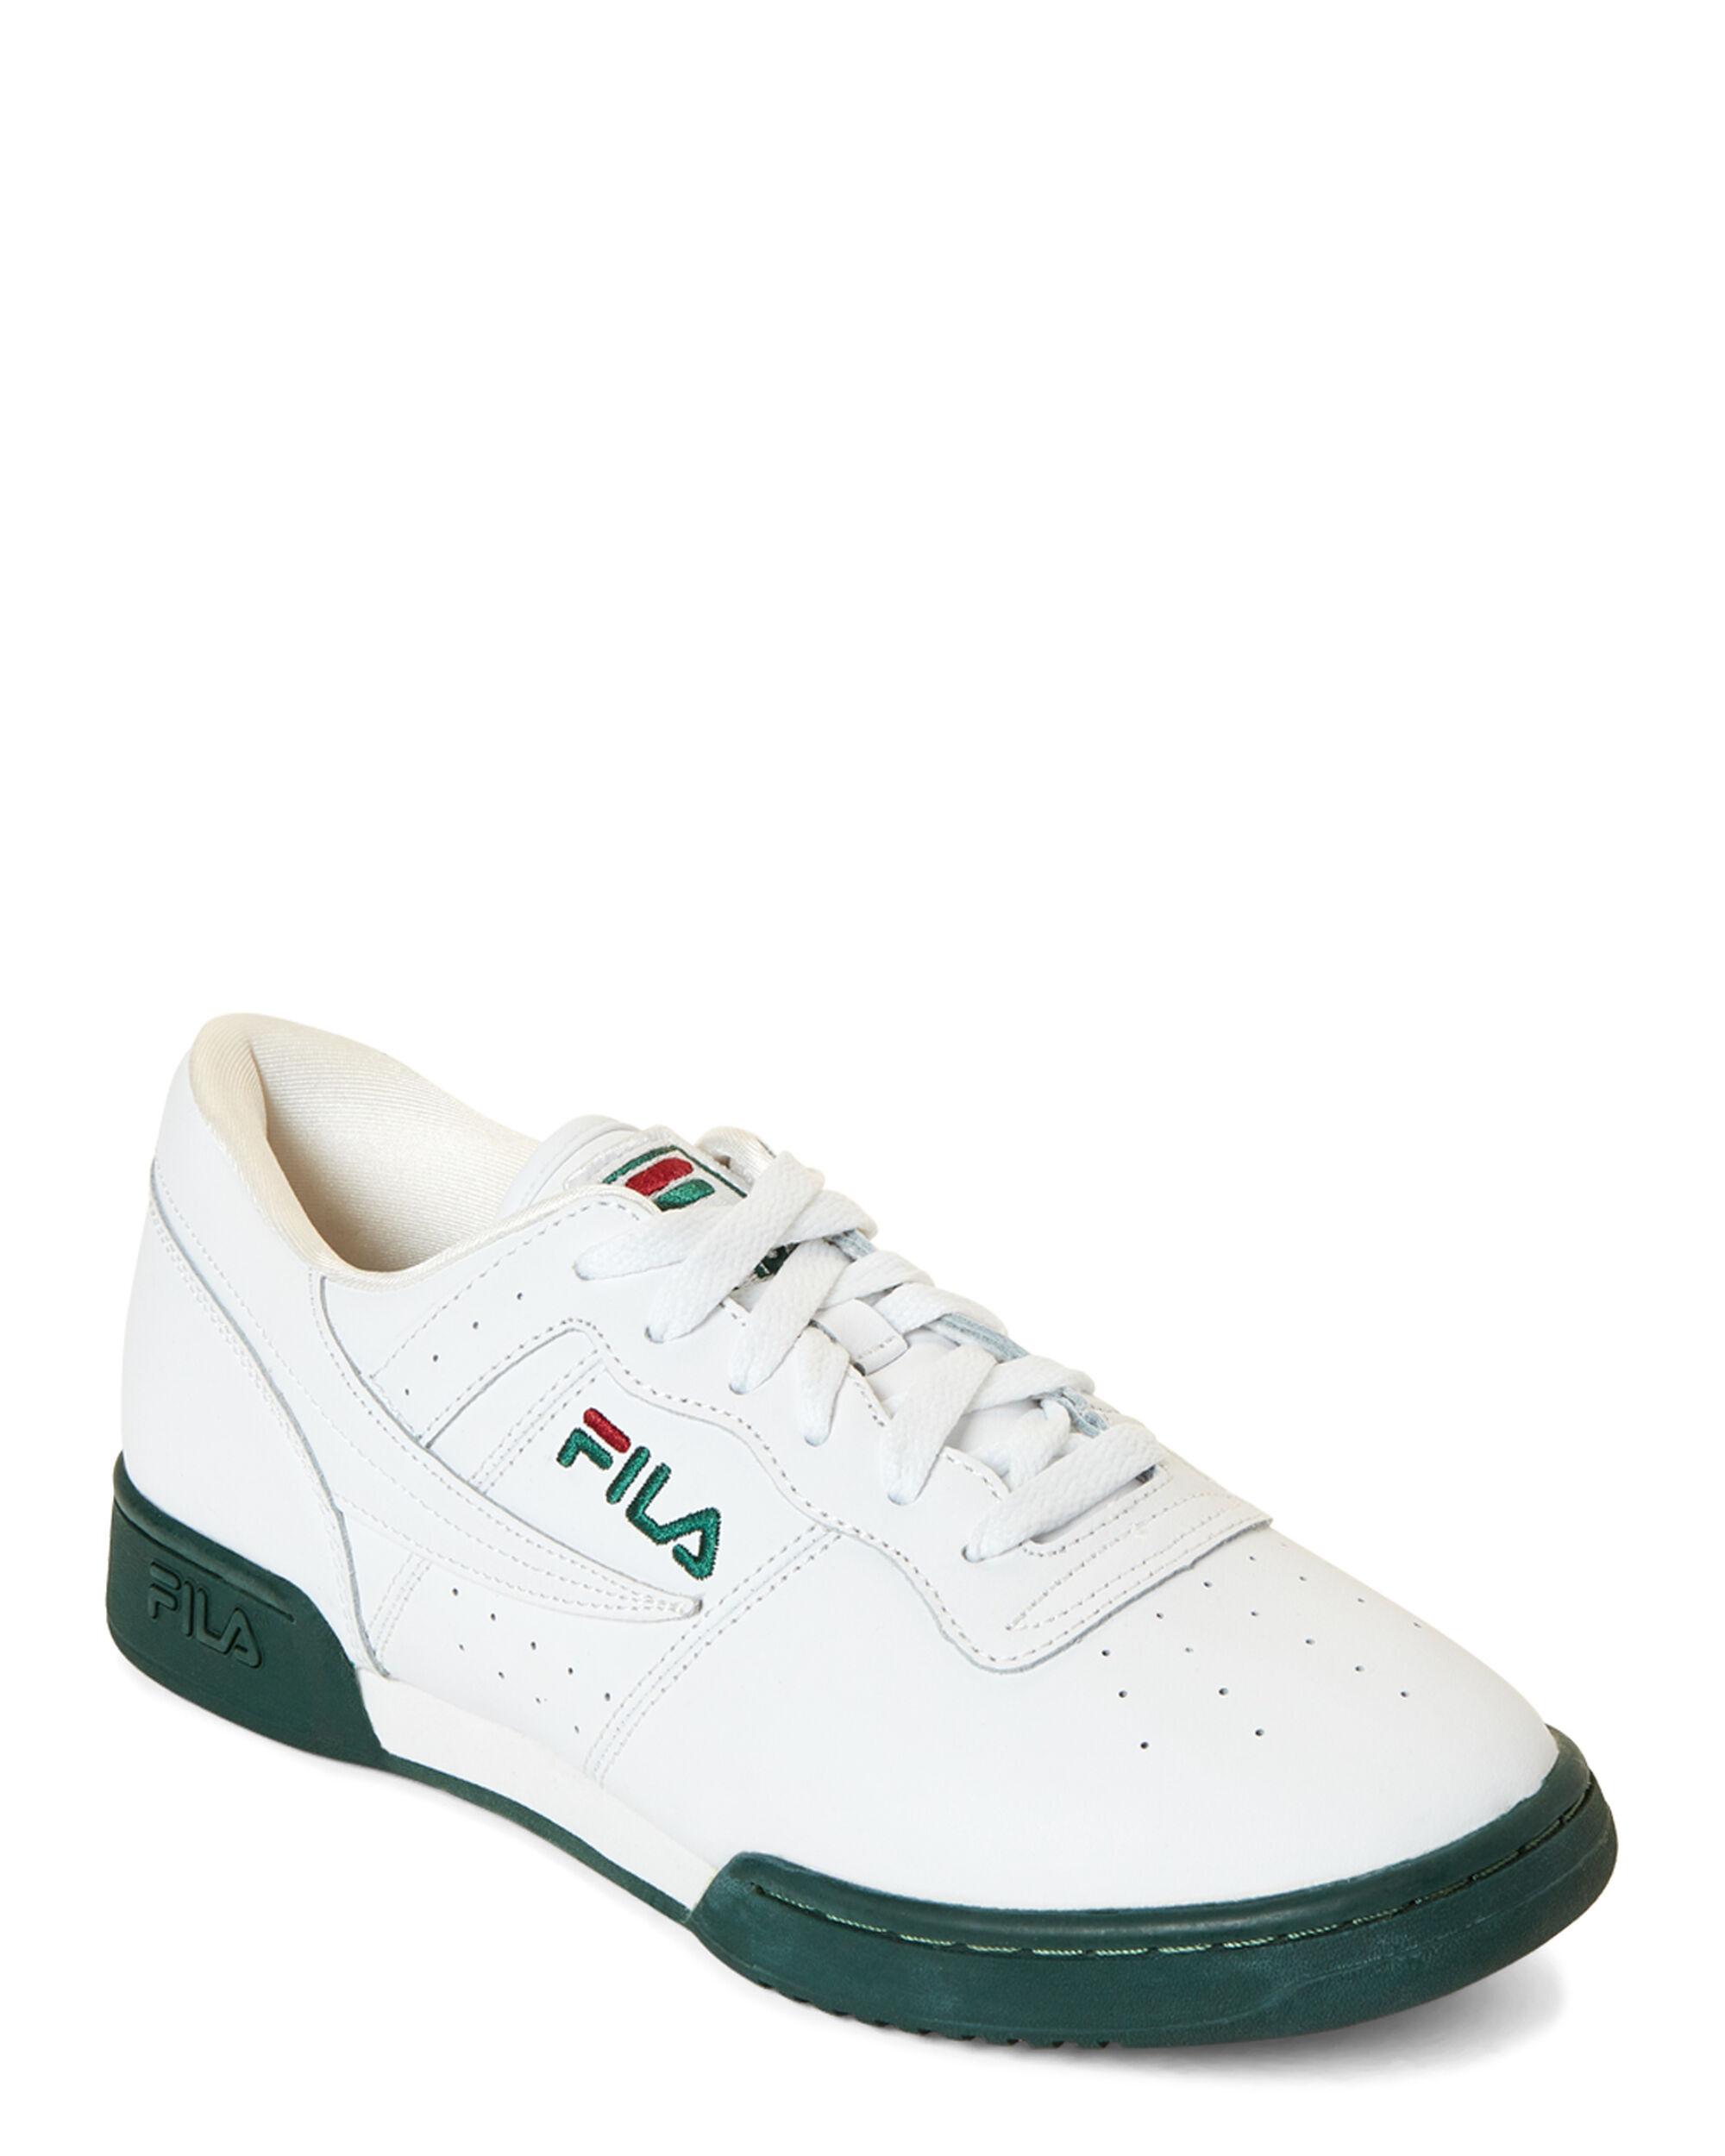 Fila Leather White & Sycamore Original Fitness Low-top Sneakers for Men ...